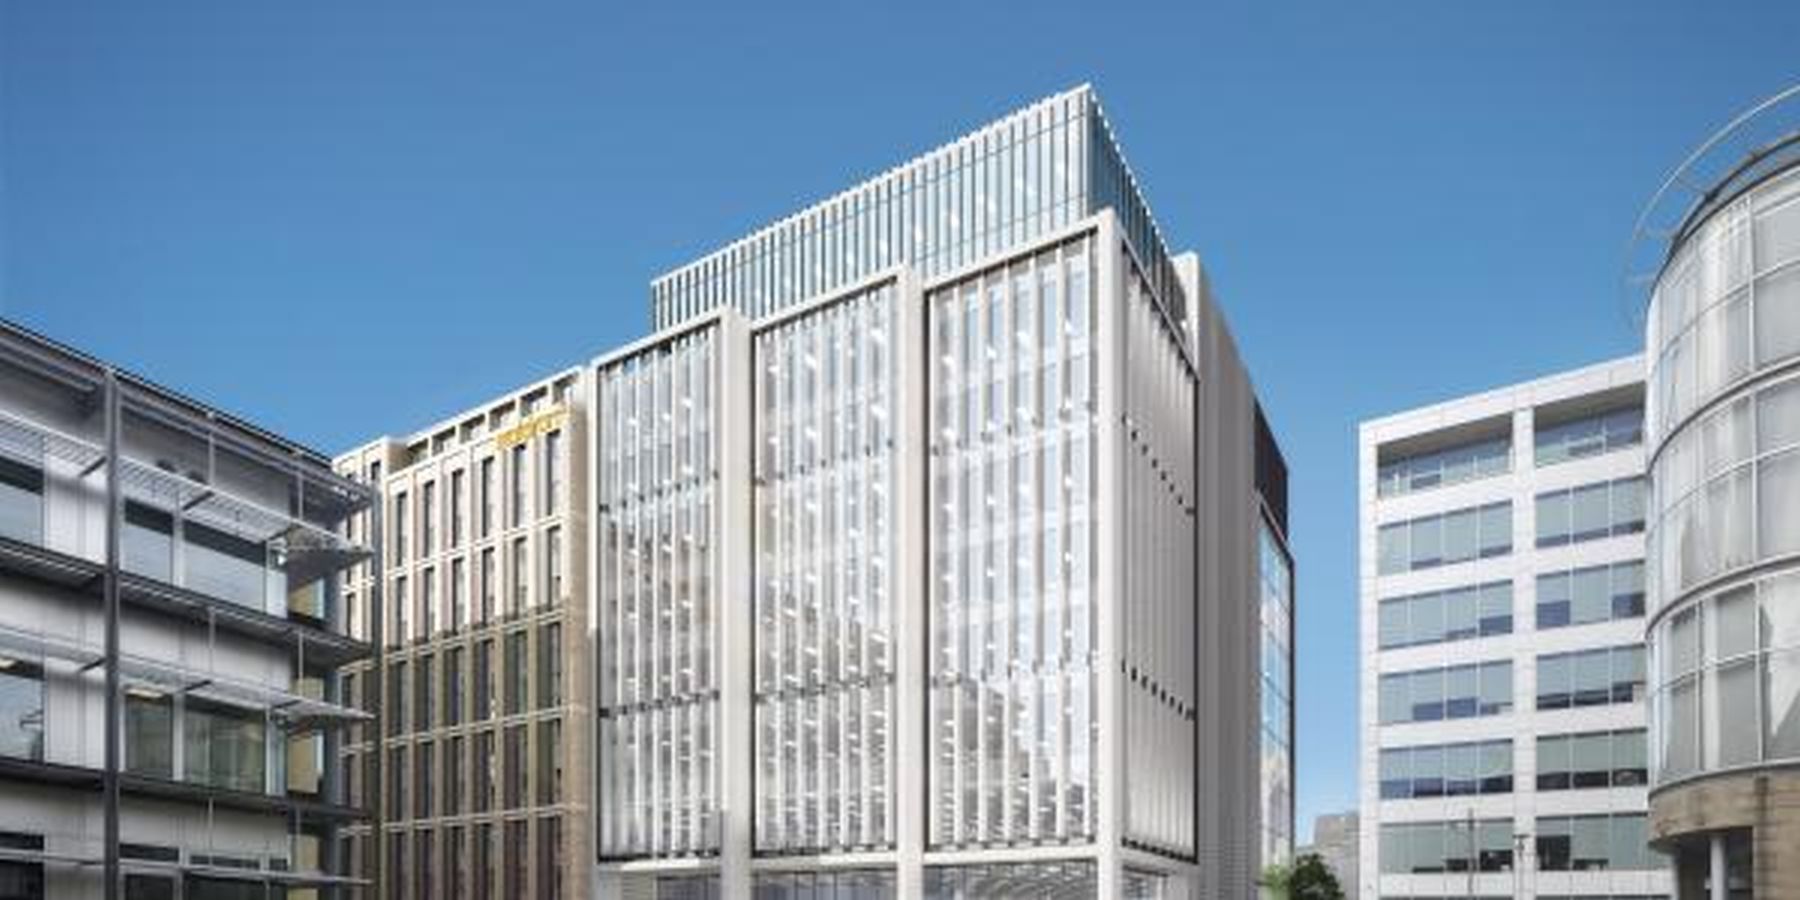 Planning permission granted for Glasgow's Broadway Central development Image